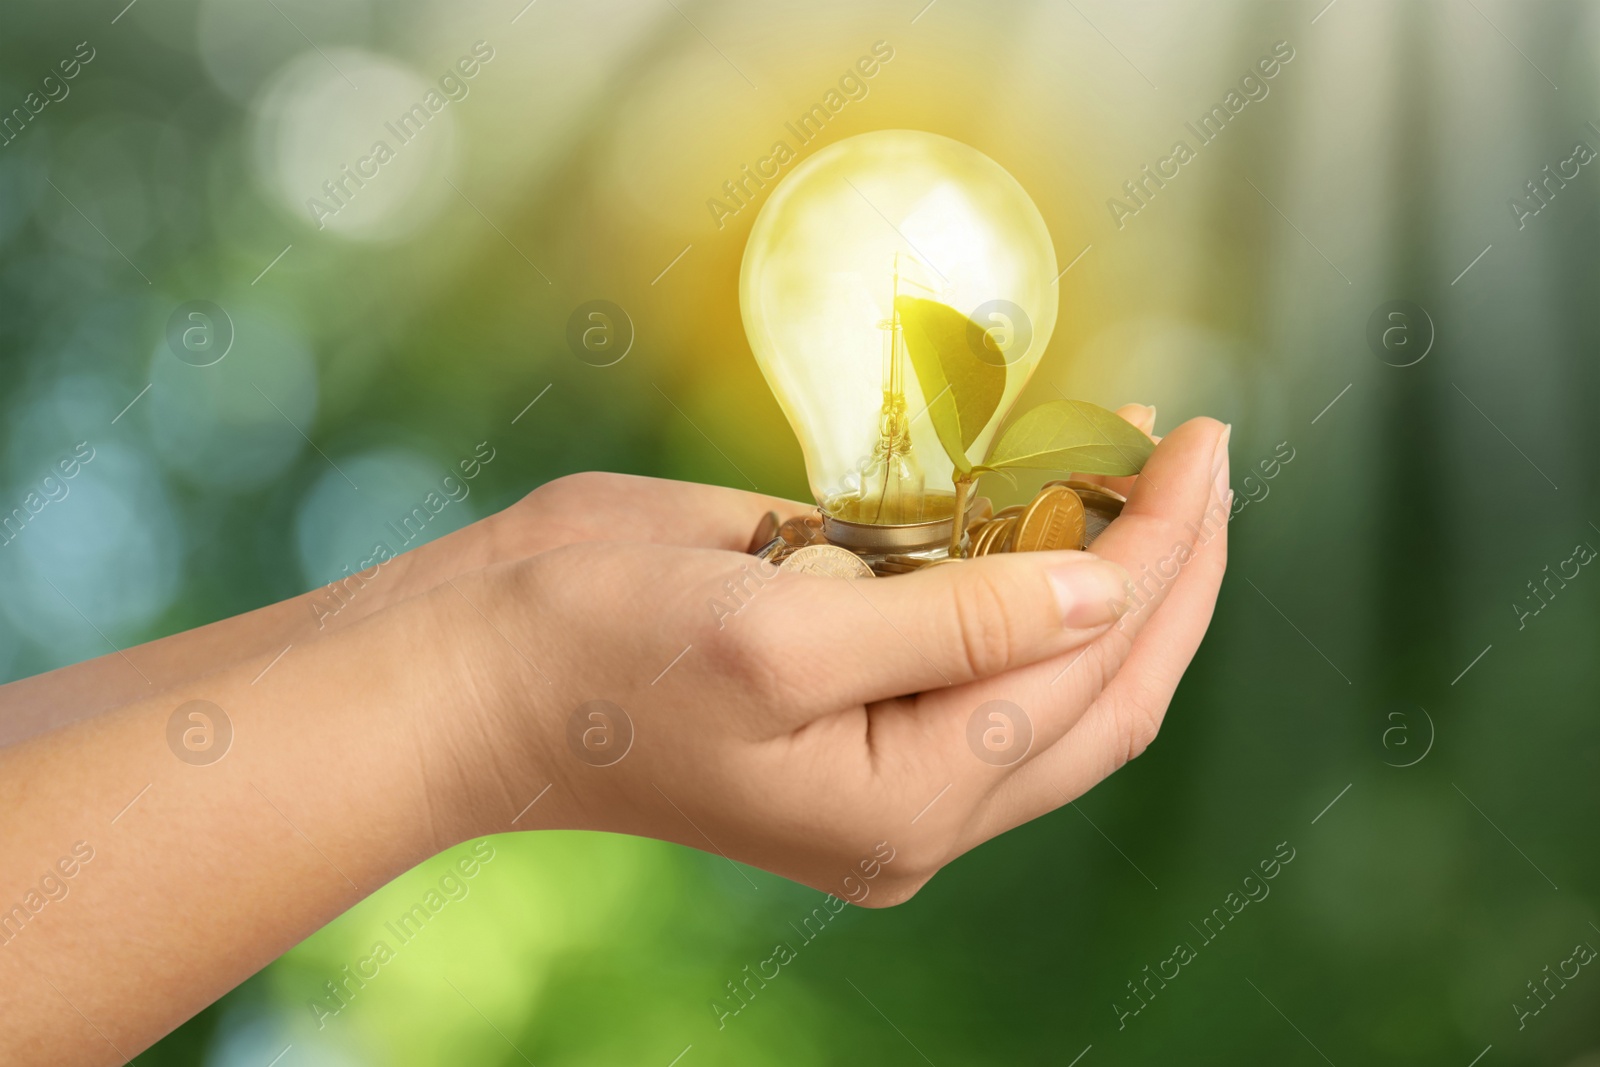 Image of Solar energy concept. Woman holding glowing light bulb with seedling and coins against green blurred background, closeup